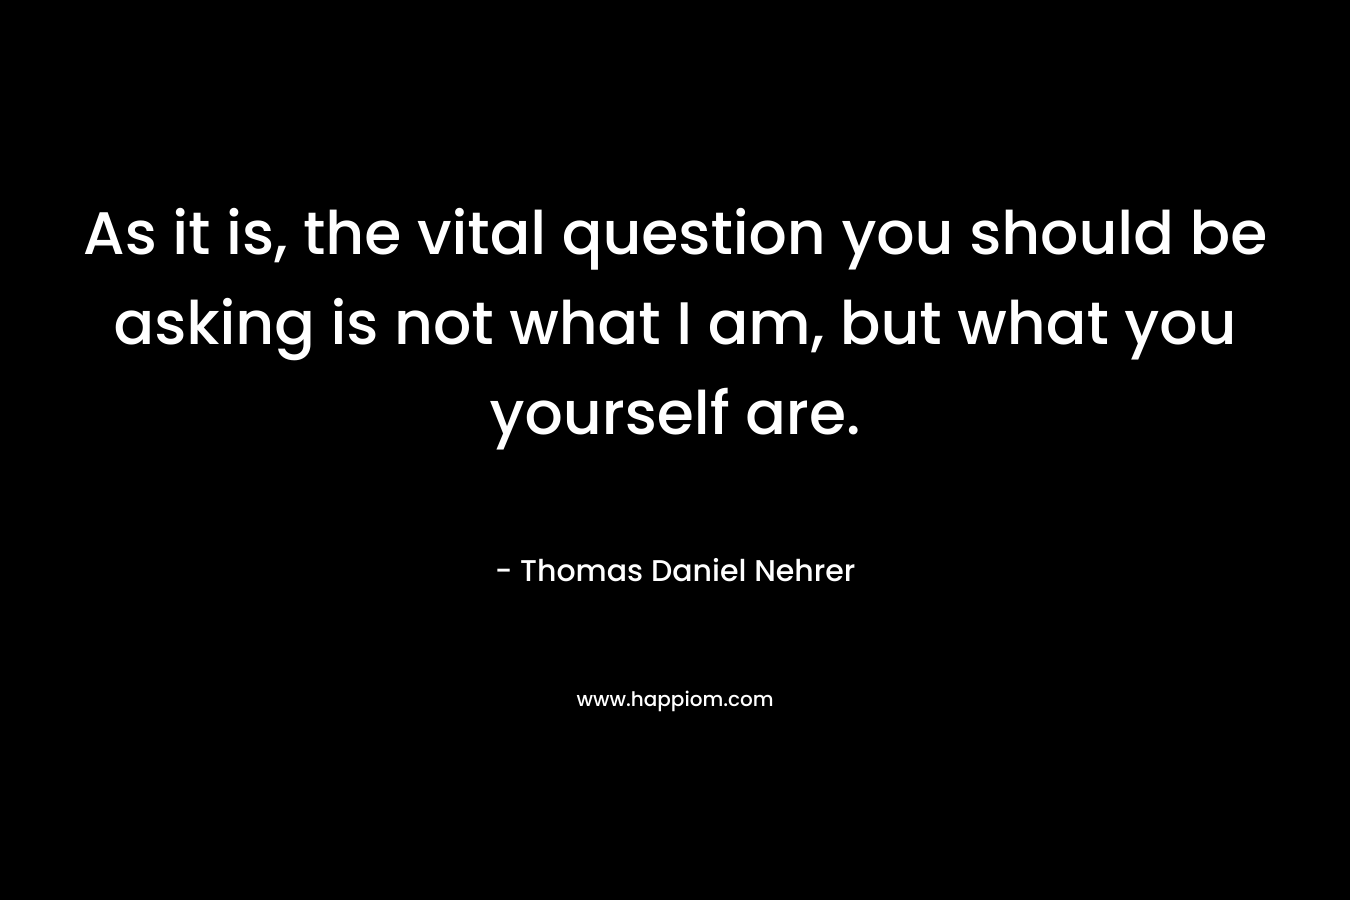 As it is, the vital question you should be asking is not what I am, but what you yourself are.